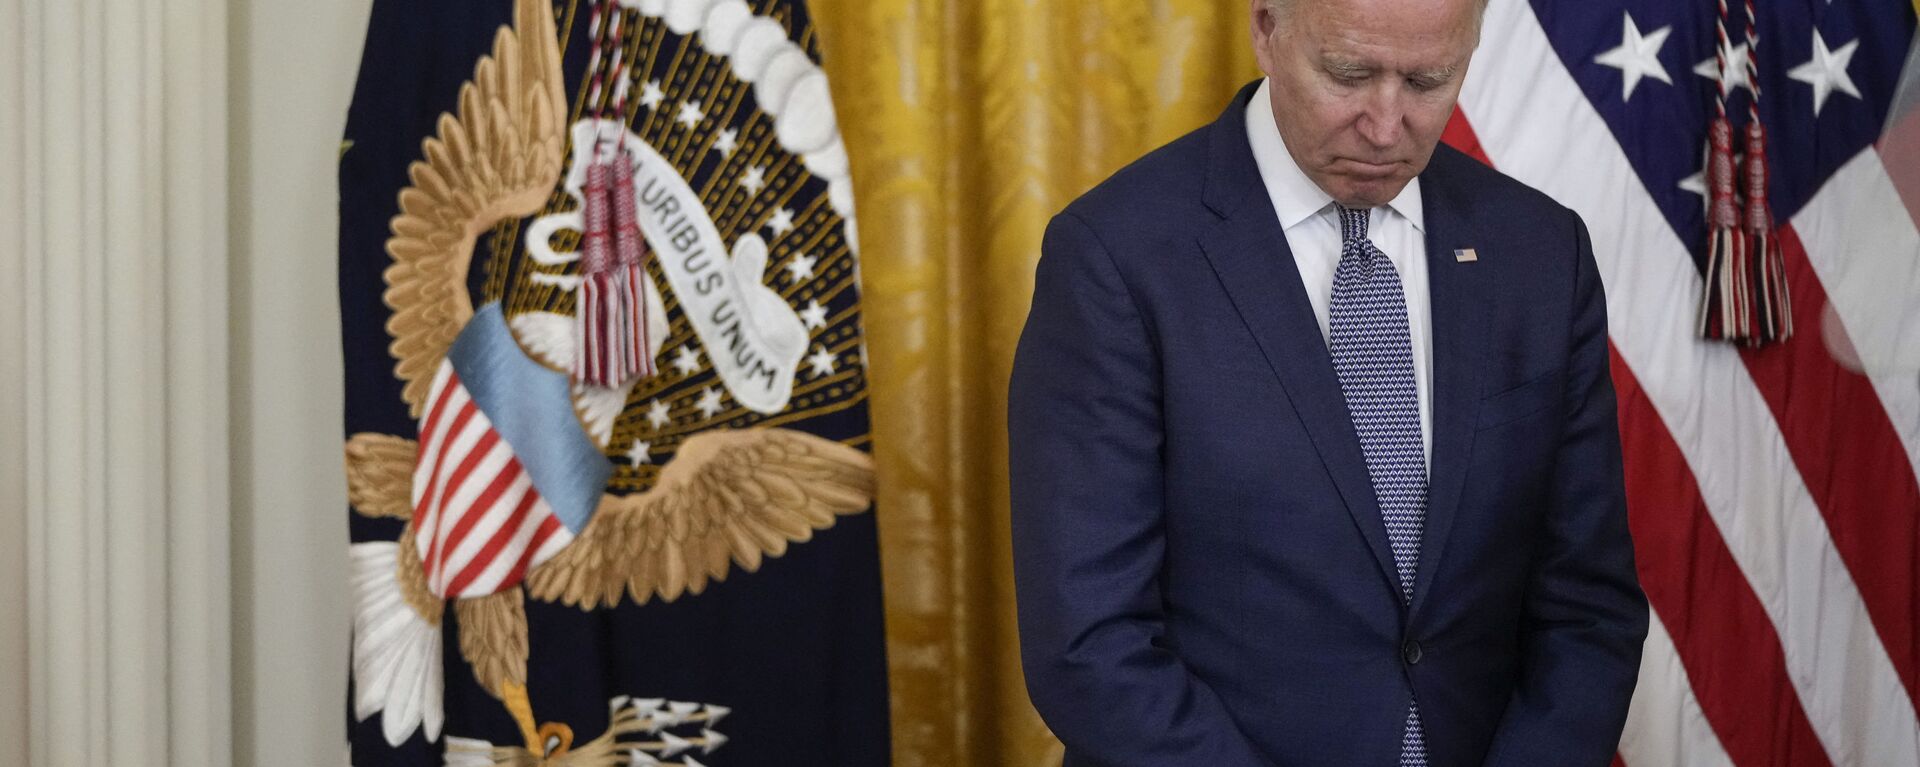 U.S. President Joe Biden waits to speak before signing the Juneteenth National Independence Day Act into law in the East Room of the White House on June 17, 2021 in Washington, DC. The Juneteenth holiday marks the end of slavery in the United States and the Juneteenth National Independence Day will become the 12th legal federal holiday — the first new one since Martin Luther King Jr. Day was signed into law in 1983. - Sputnik International, 1920, 19.06.2021